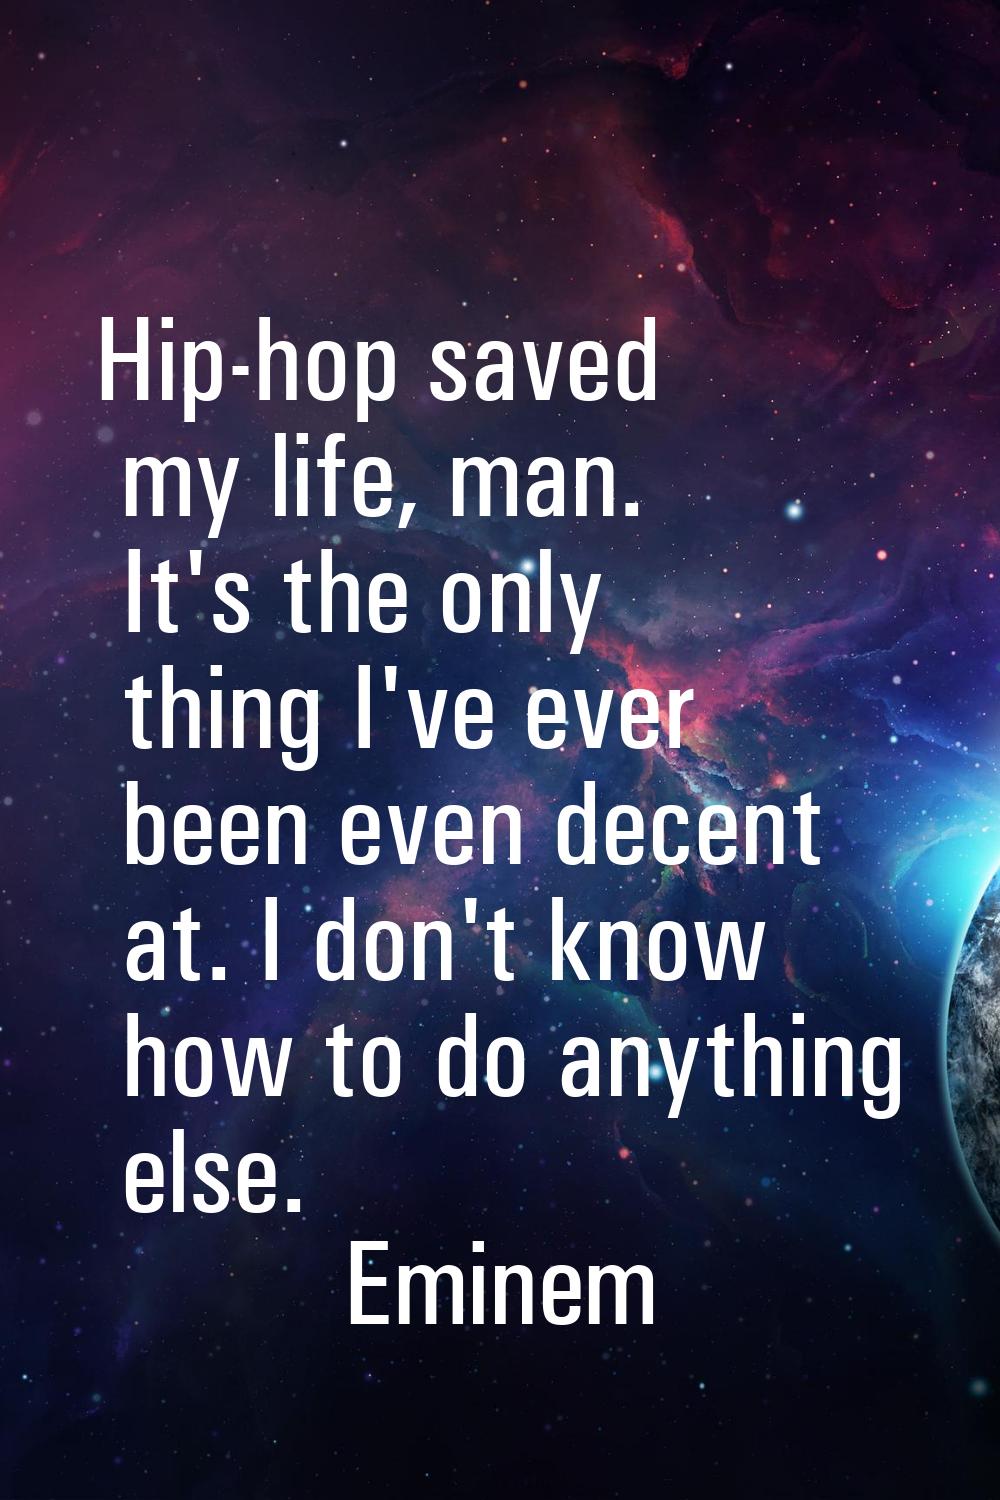 Hip-hop saved my life, man. It's the only thing I've ever been even decent at. I don't know how to 